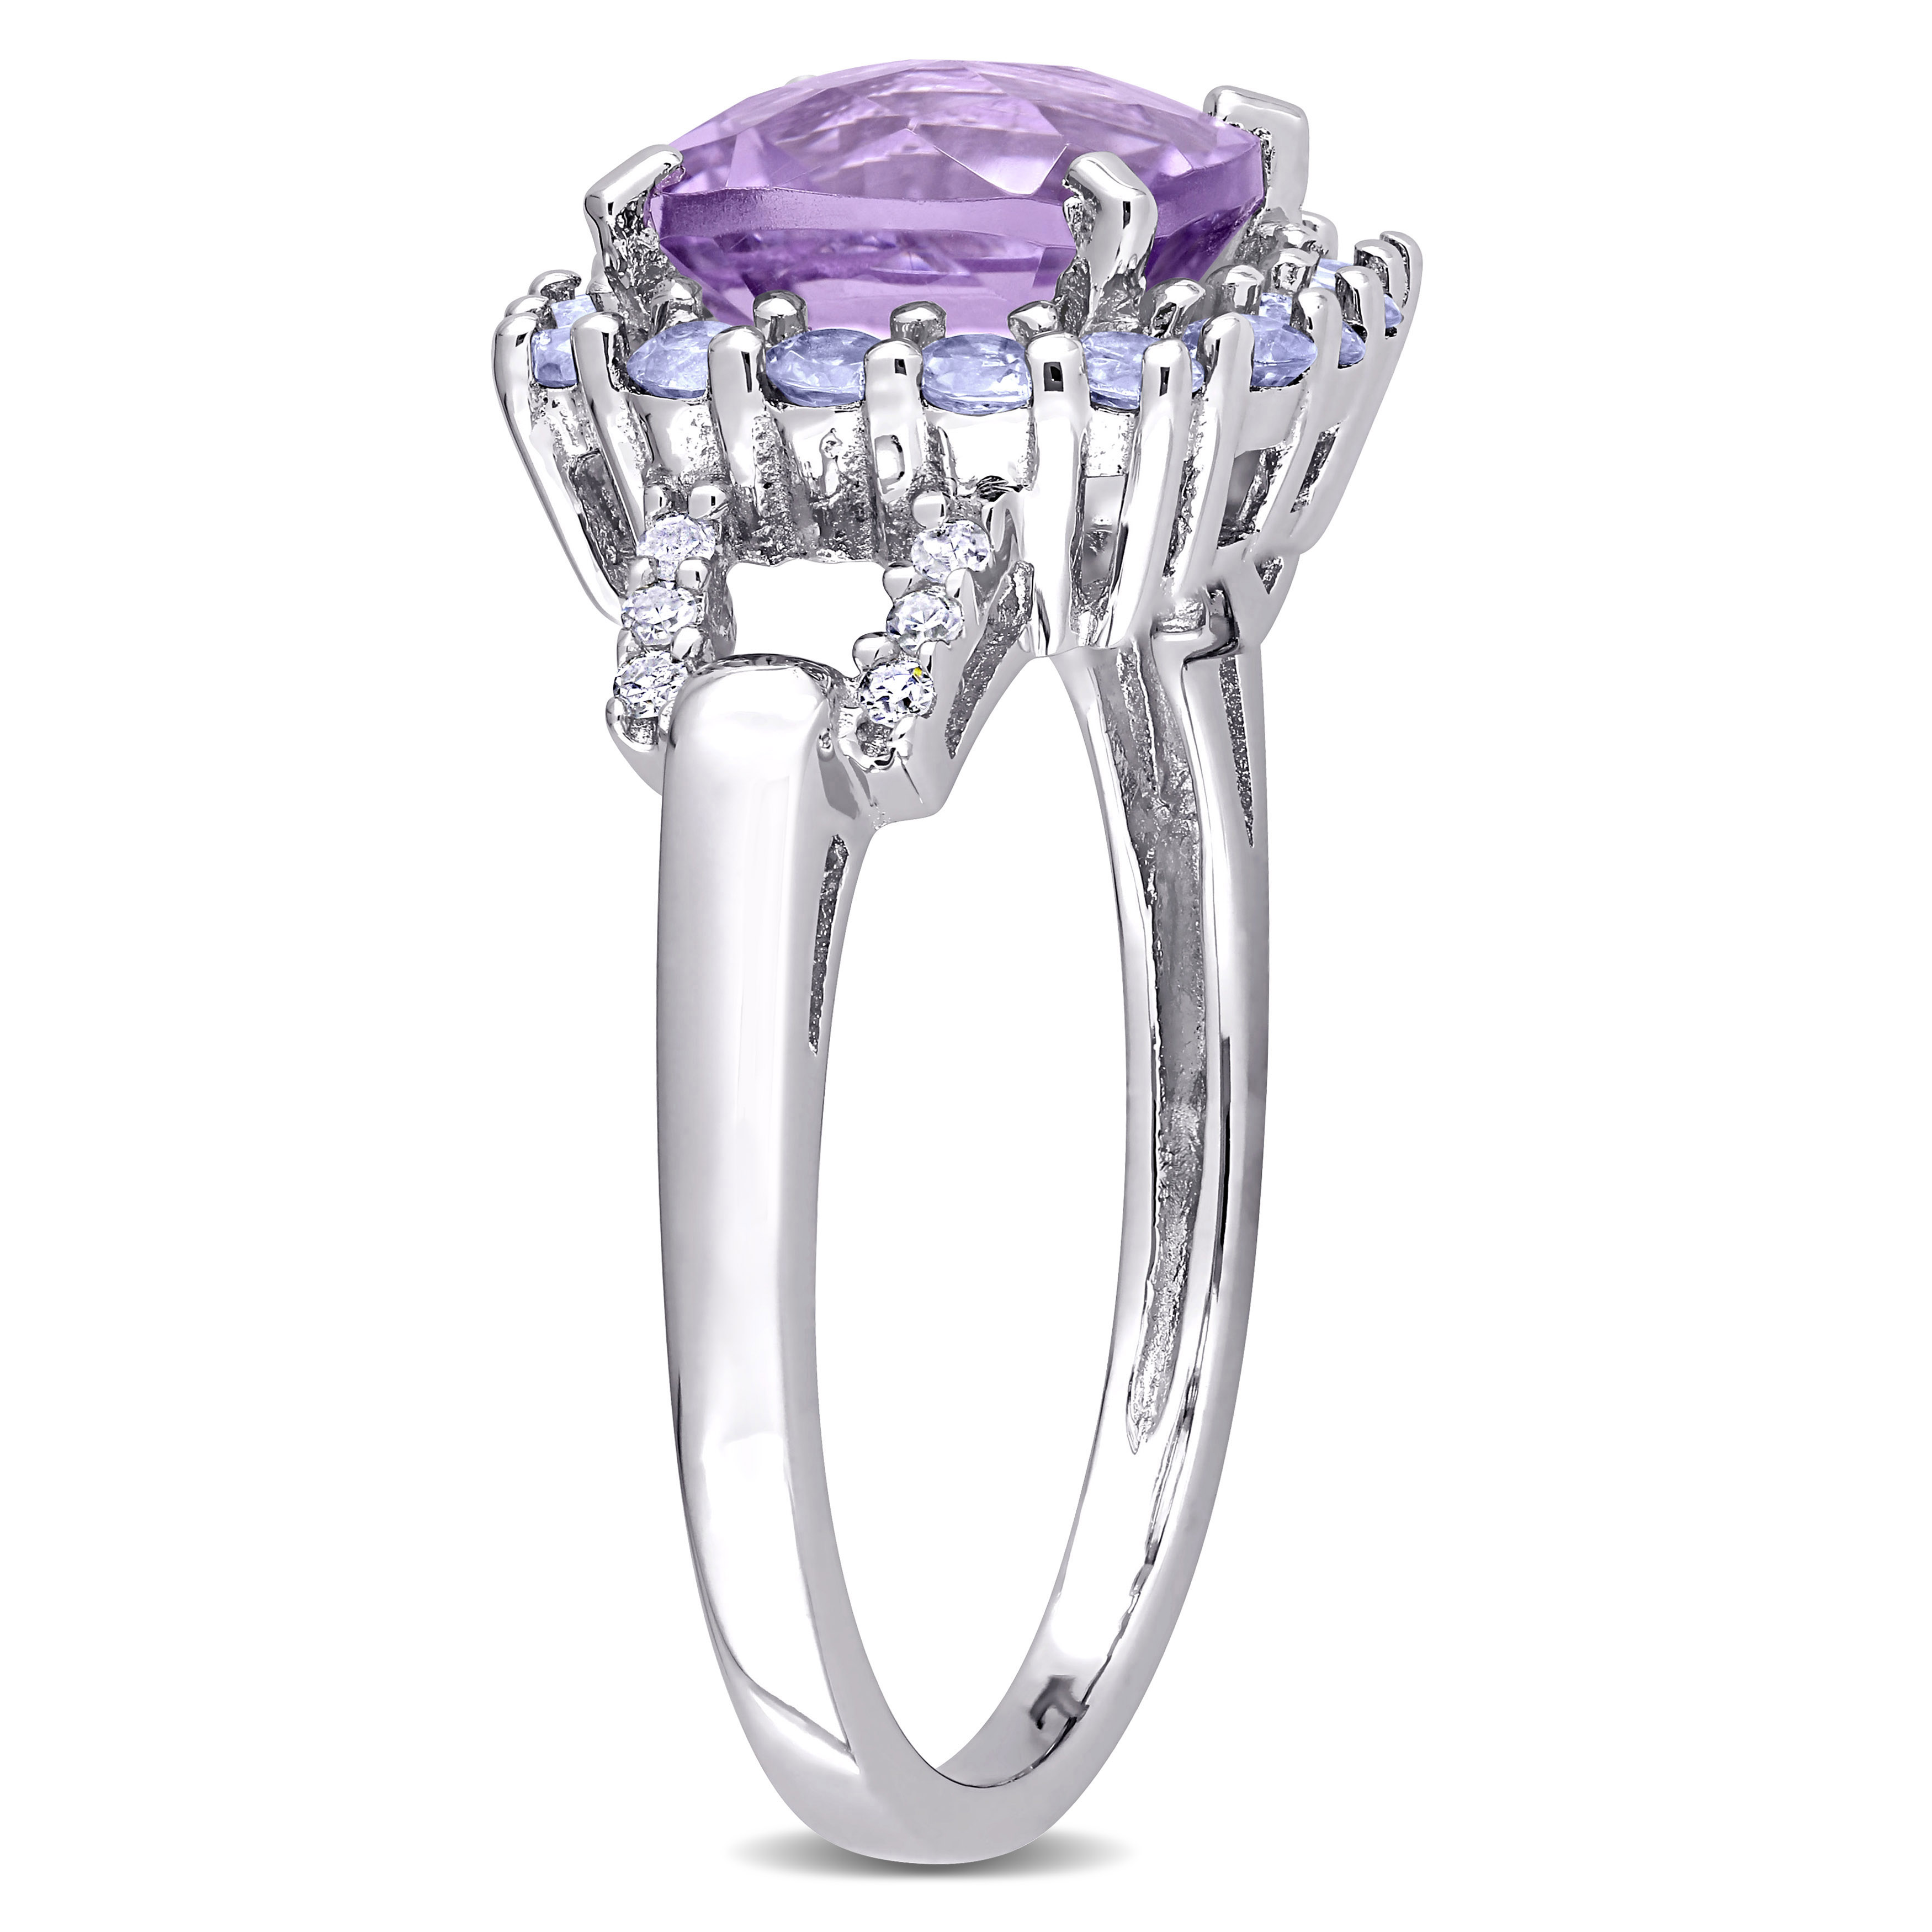 Halo Diamond, Amethyst, and Cushion Cut Tanzanite Ring in Sterling Silver